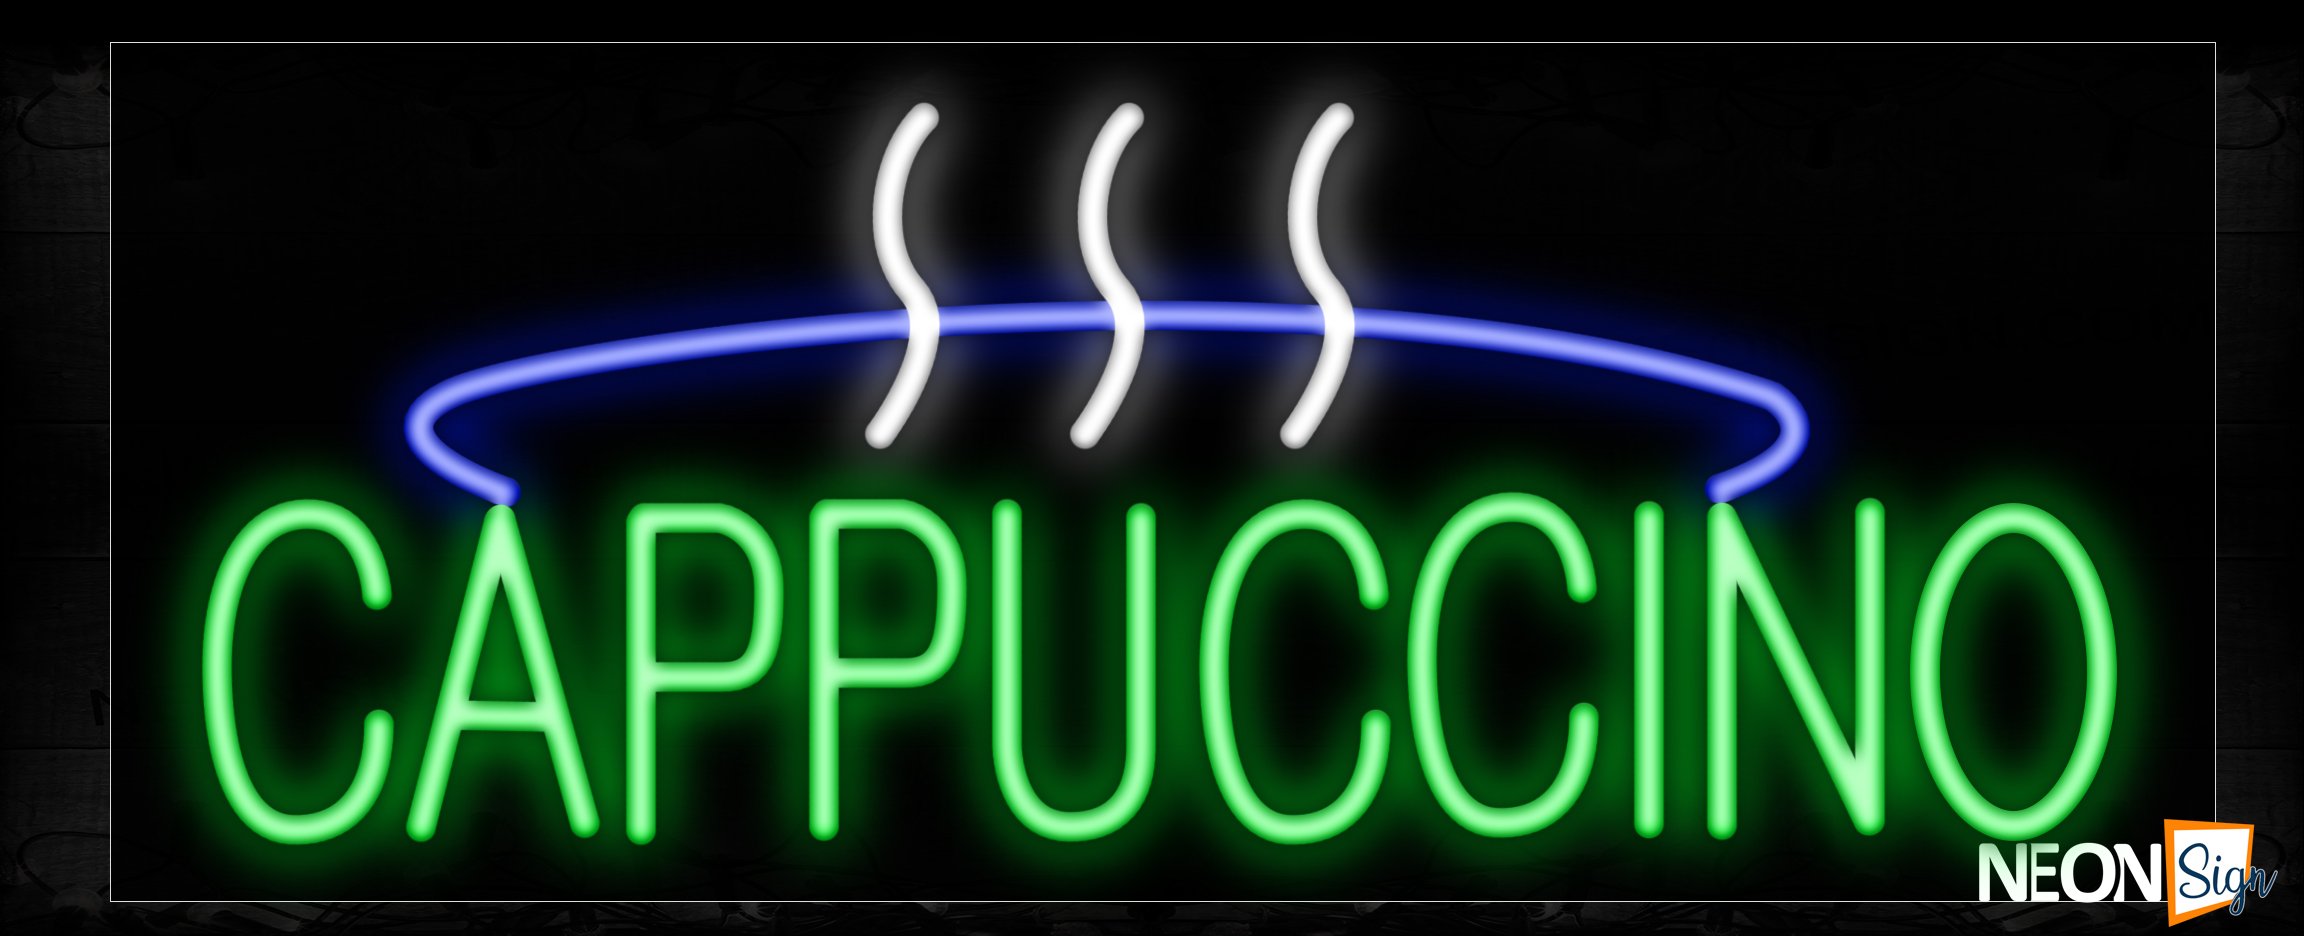 Image of 10029 Cappuccino with blue and white lines Neon Sign_13x32 Black Backing